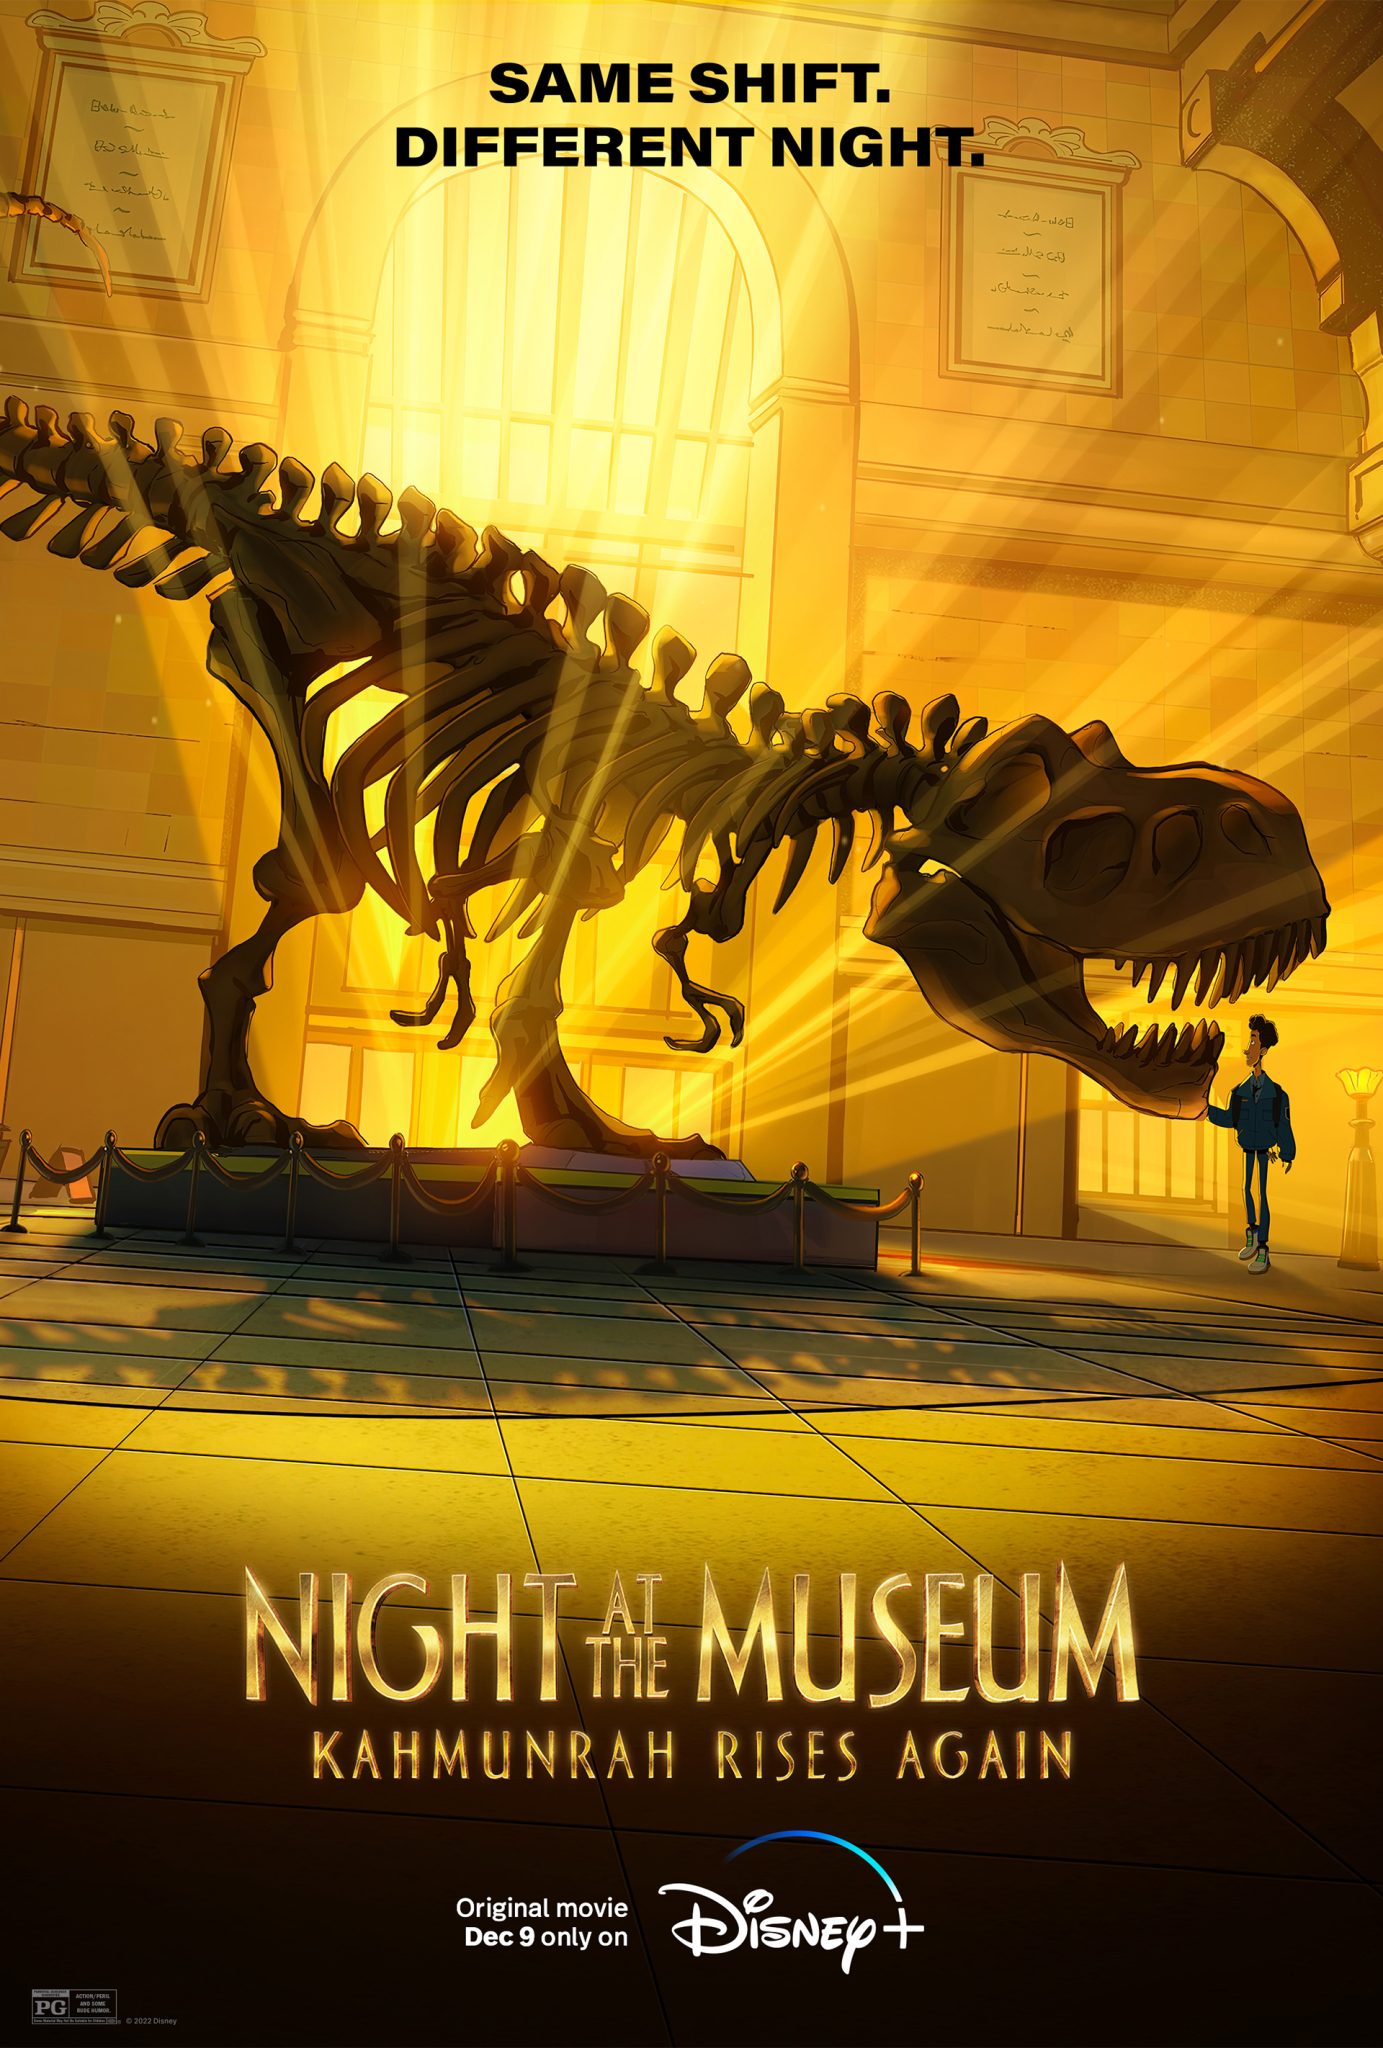 Disney+ Releases Trailer for Original Movie ‘Night at the Museum